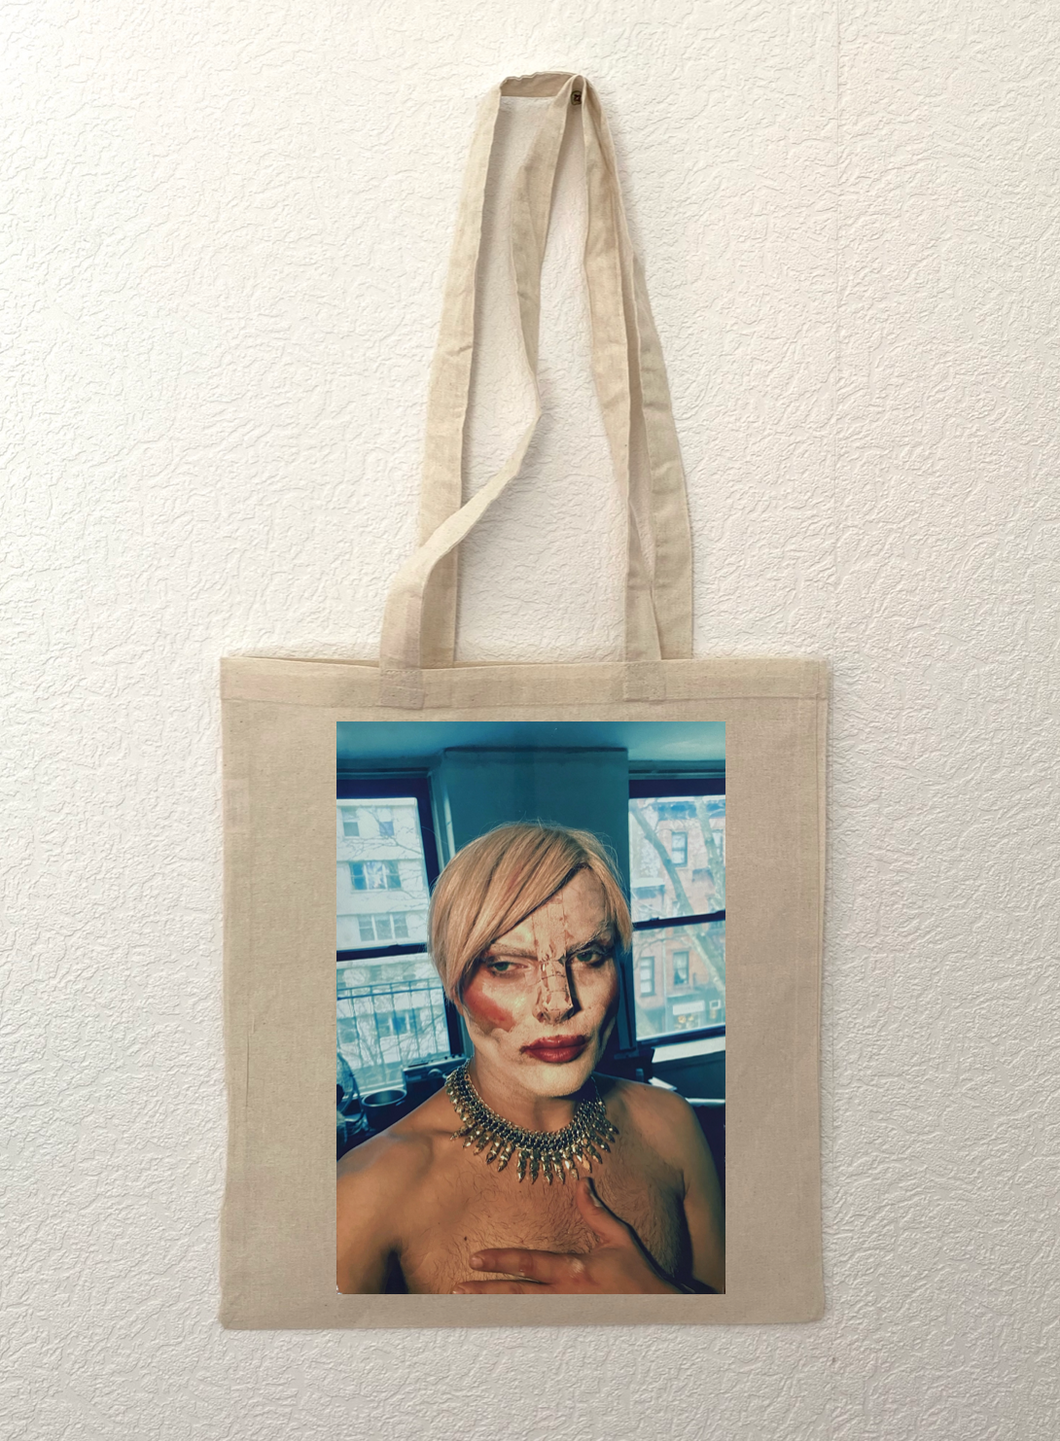 Eco bag by Ivo Dimchev